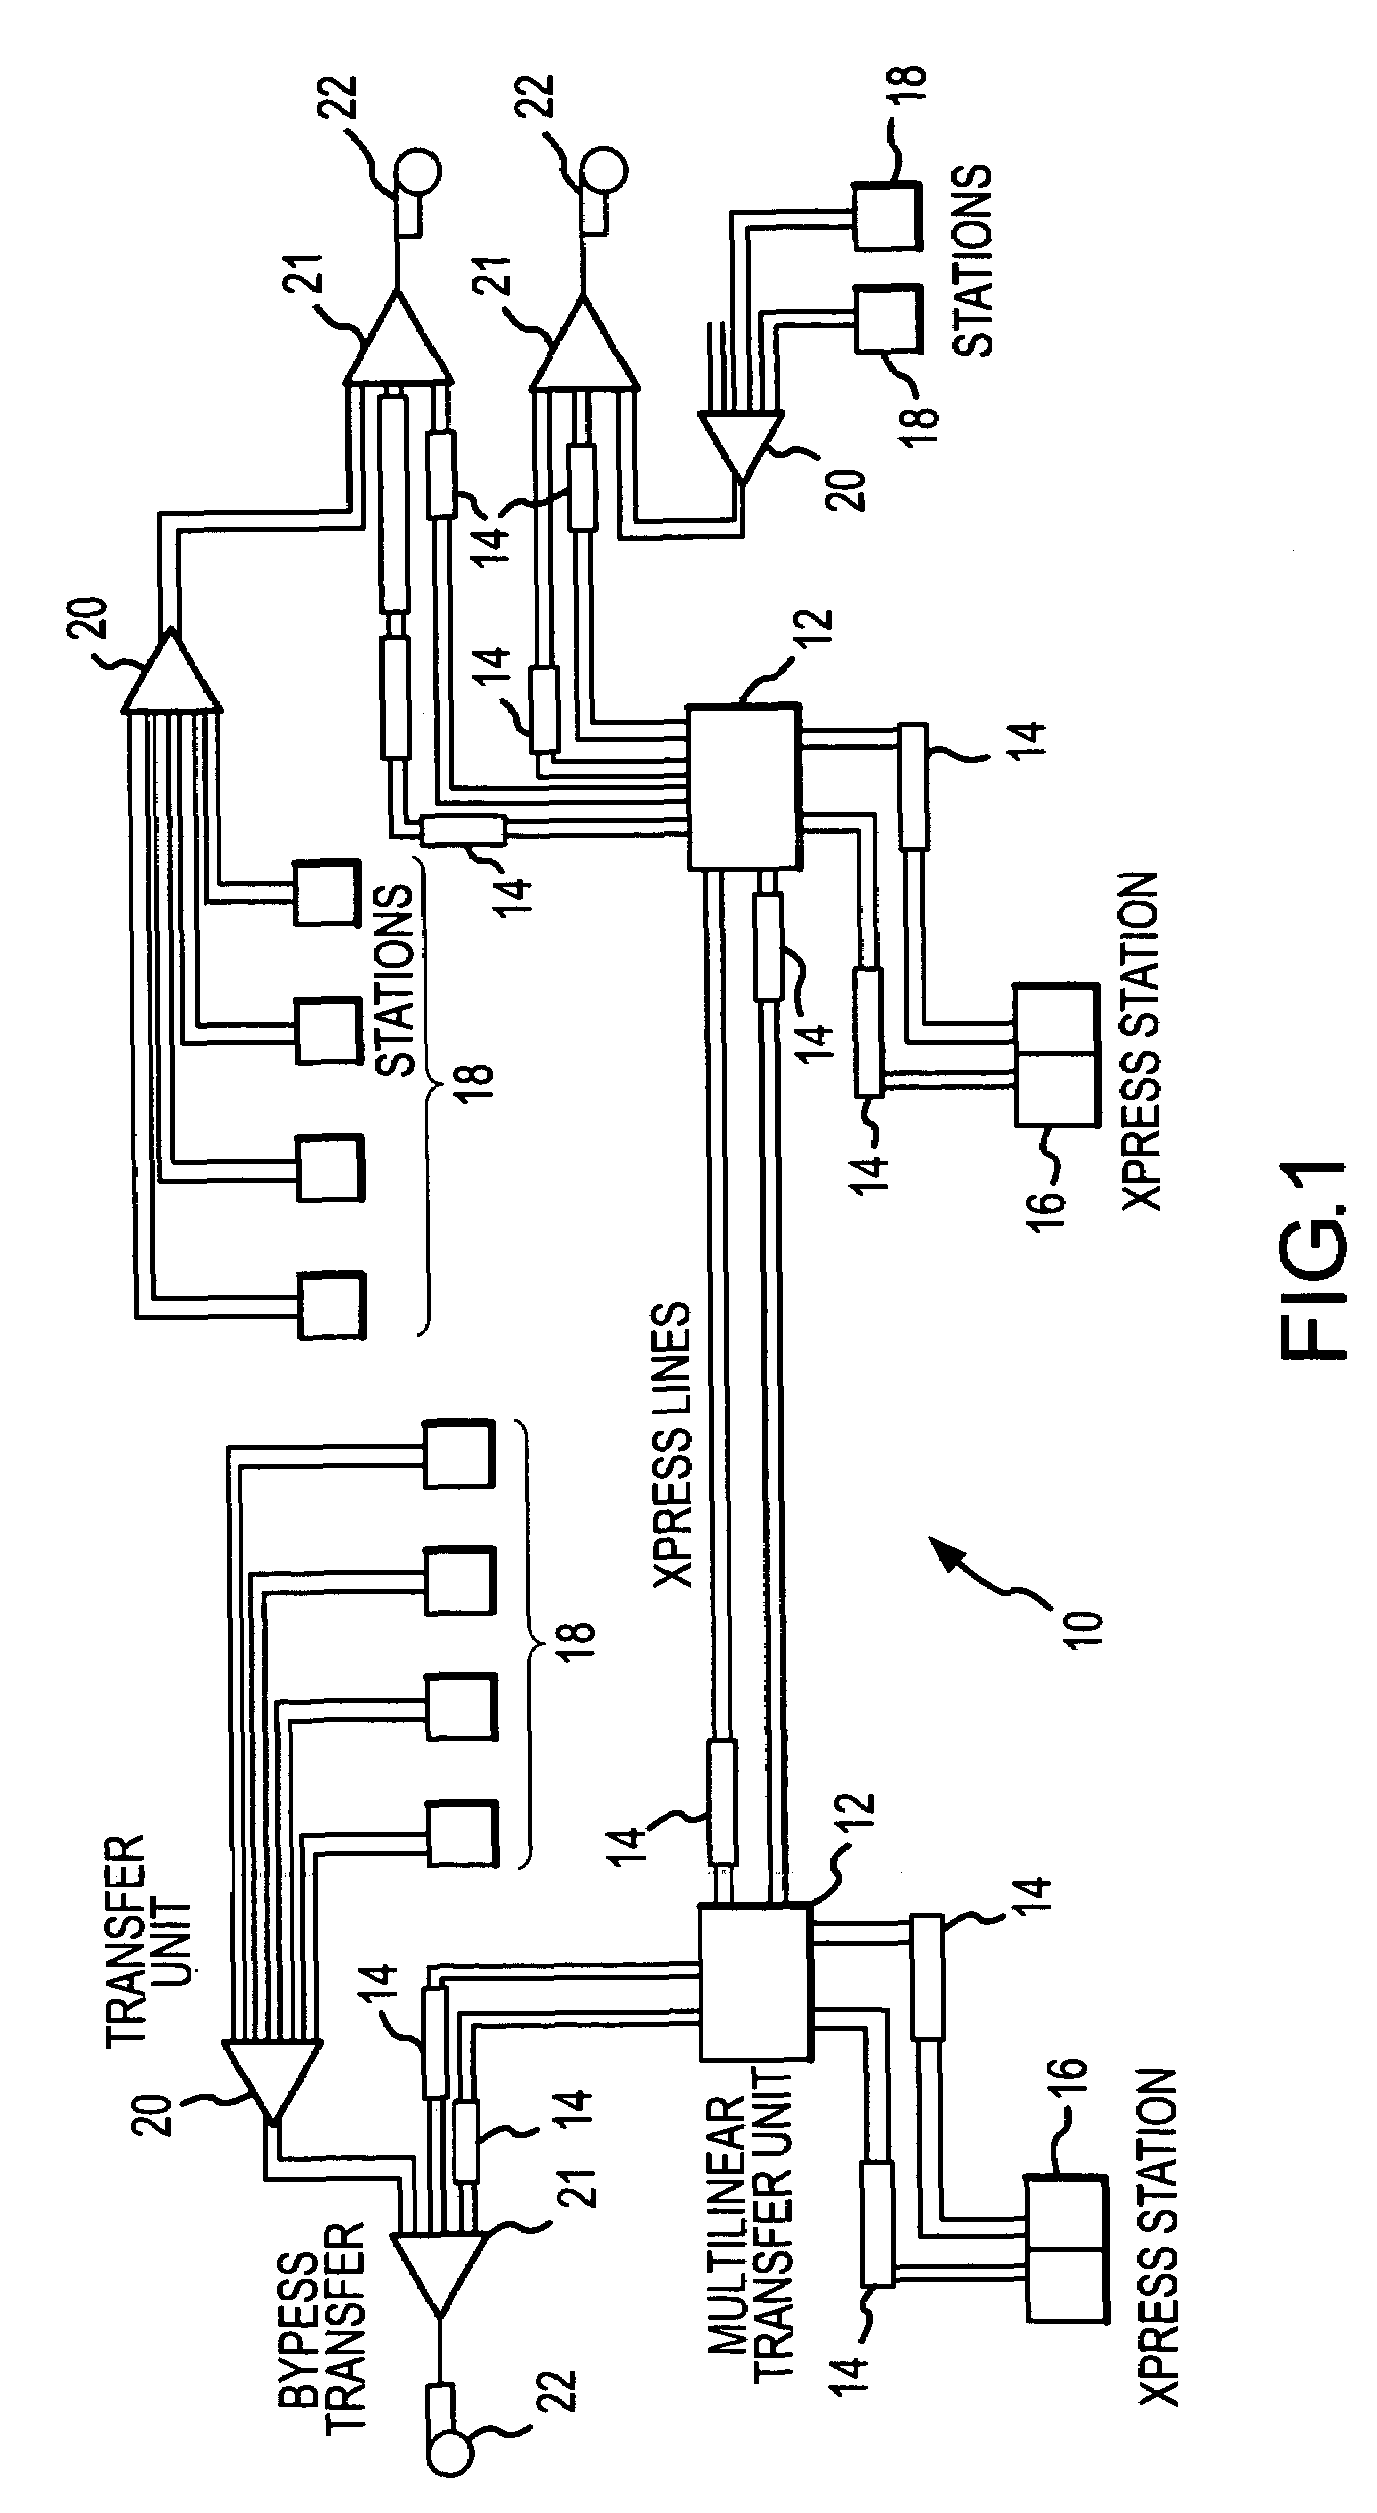 System and method for carrier identification in a pneumatic tube system